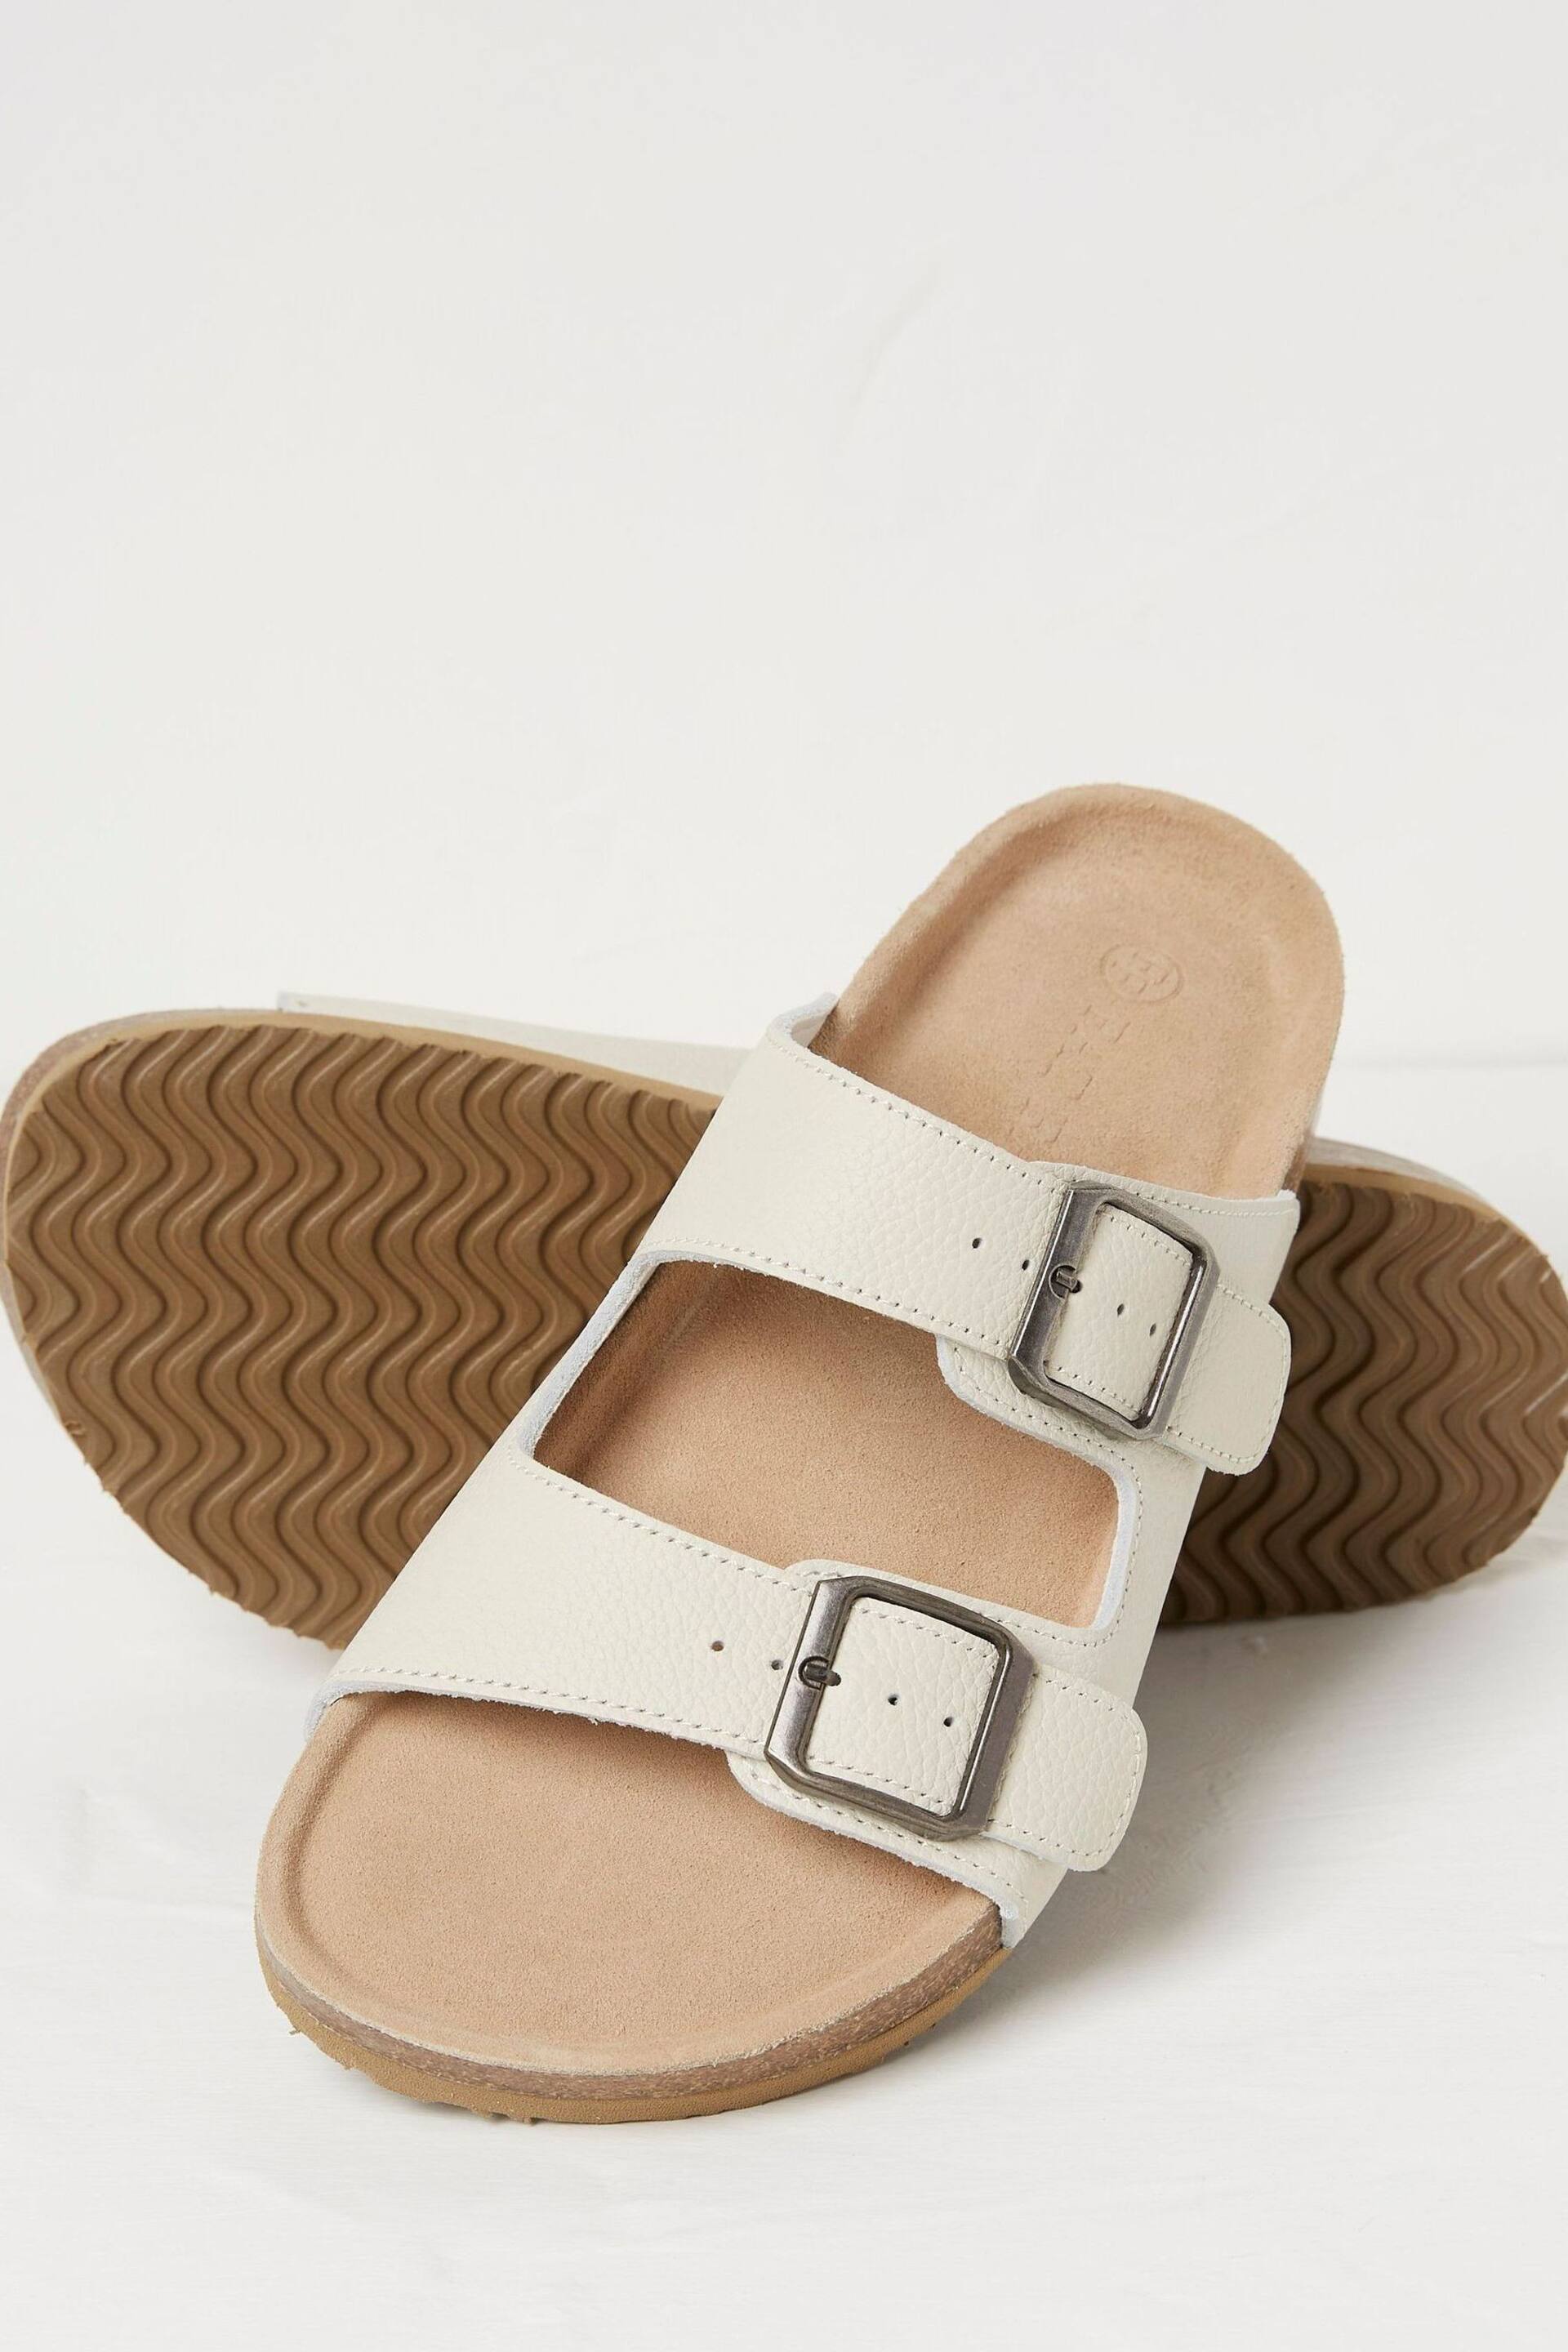 FatFace White Meldon Footbed Sandals - Image 2 of 3